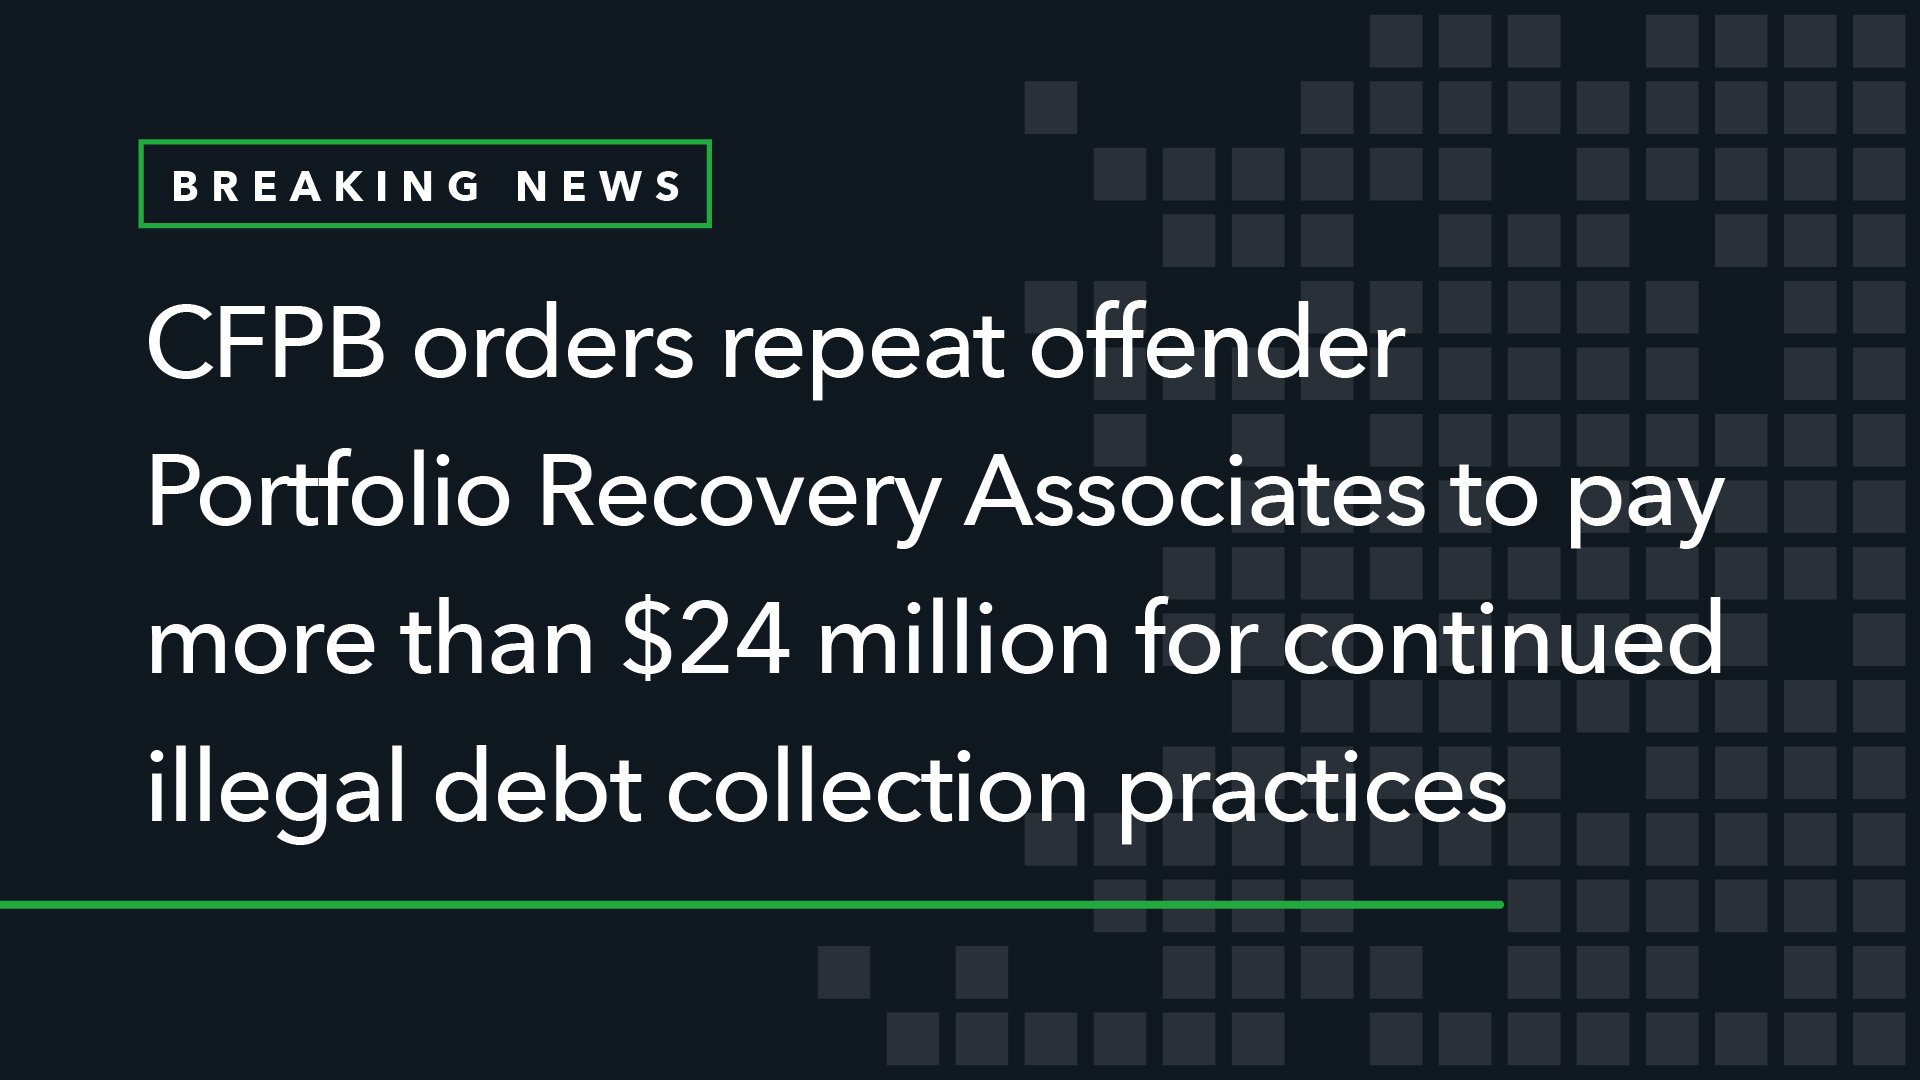 CFPB Orders Repeat Offender Portfolio Recovery Associates to Pay More Than  Million for Continued Illegal Debt Collection Practices and Consumer Reporting Violations